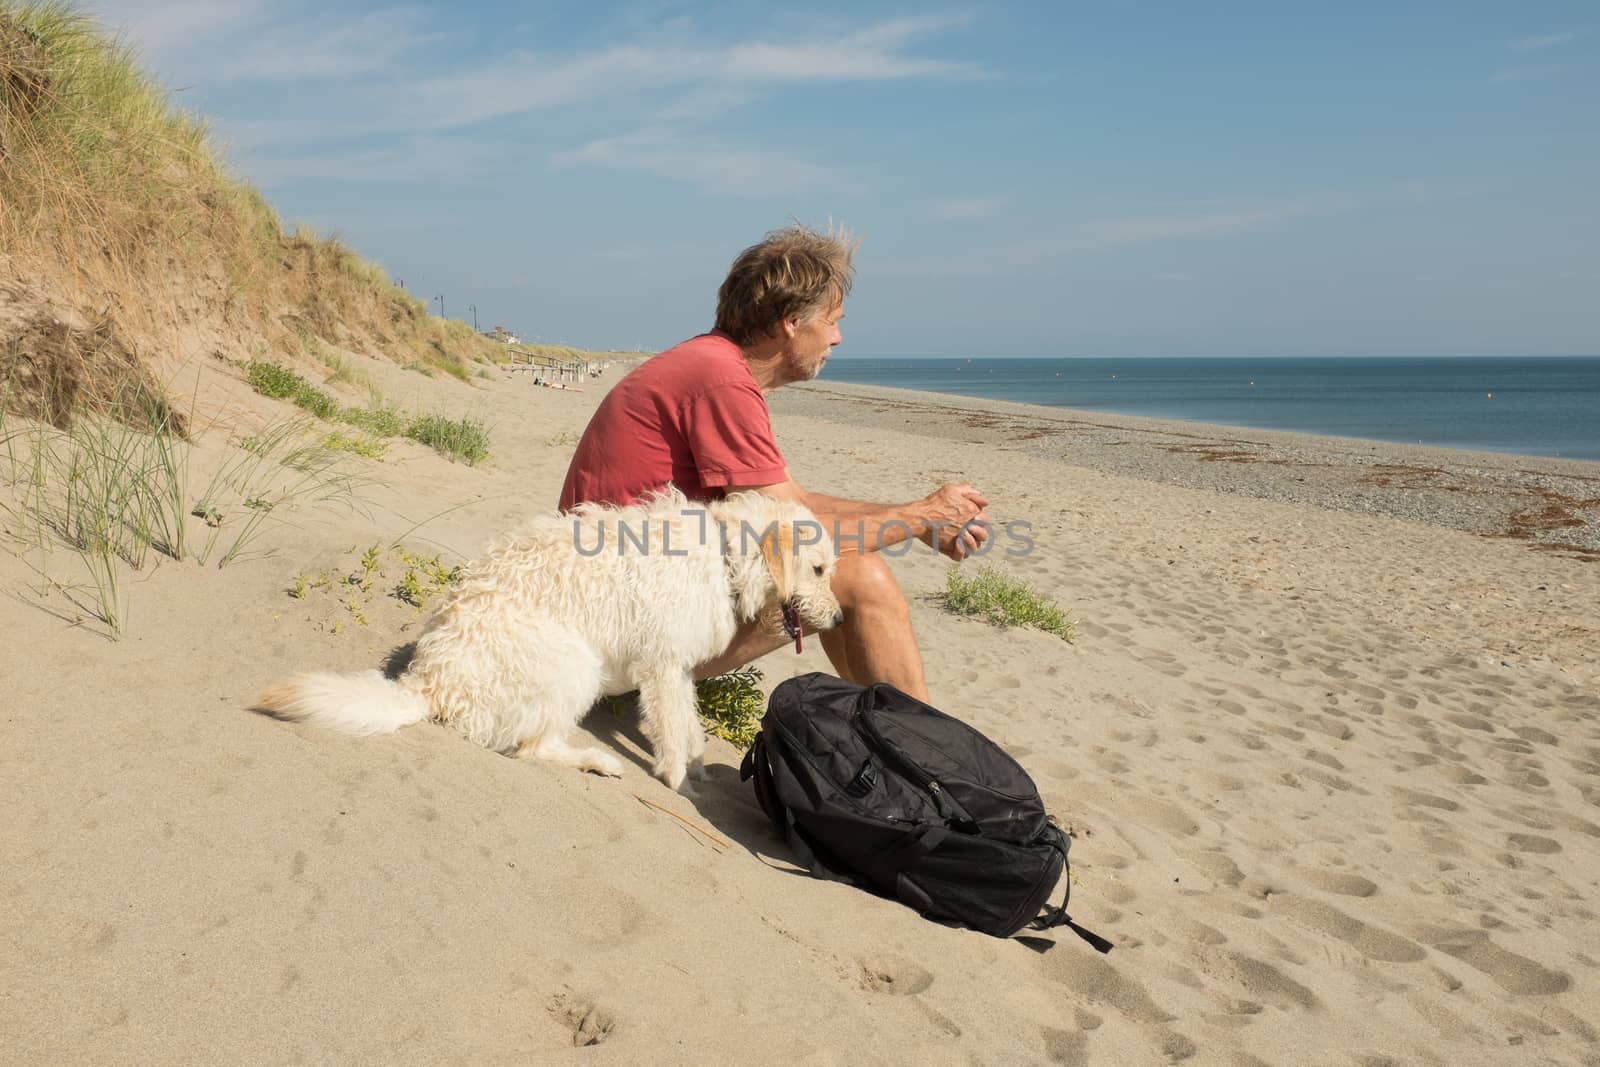 A sixty year old male with a dog, ladradoodle, sitting on a beach looking out to sea in the sun.